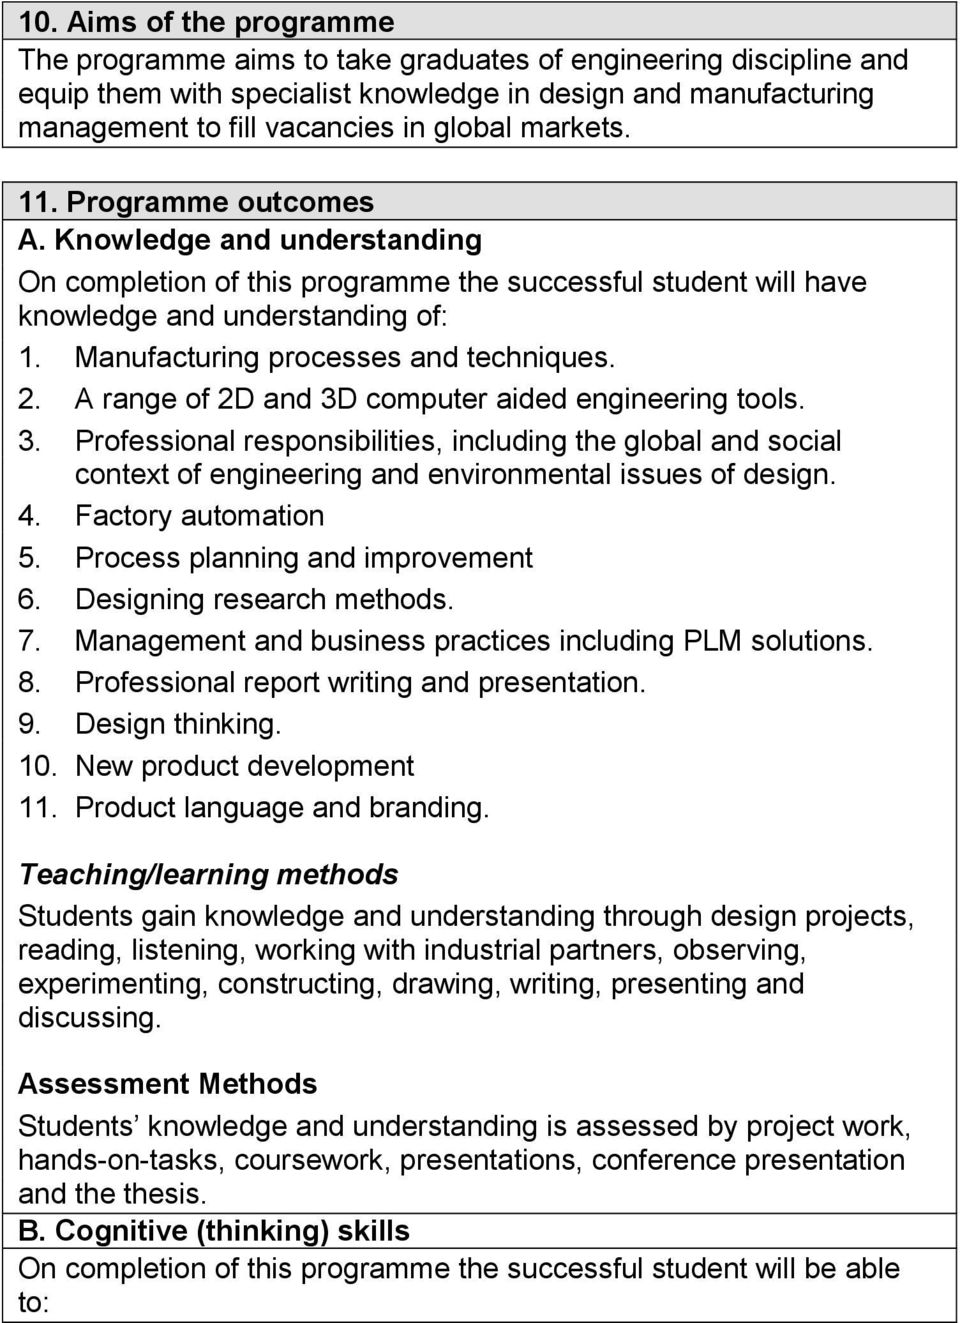 Manufacturing processes and techniques. 2. A range of 2D and 3D computer aided engineering tools. 3. Professional responsibilities, including the global and social context of engineering and environmental issues of design.